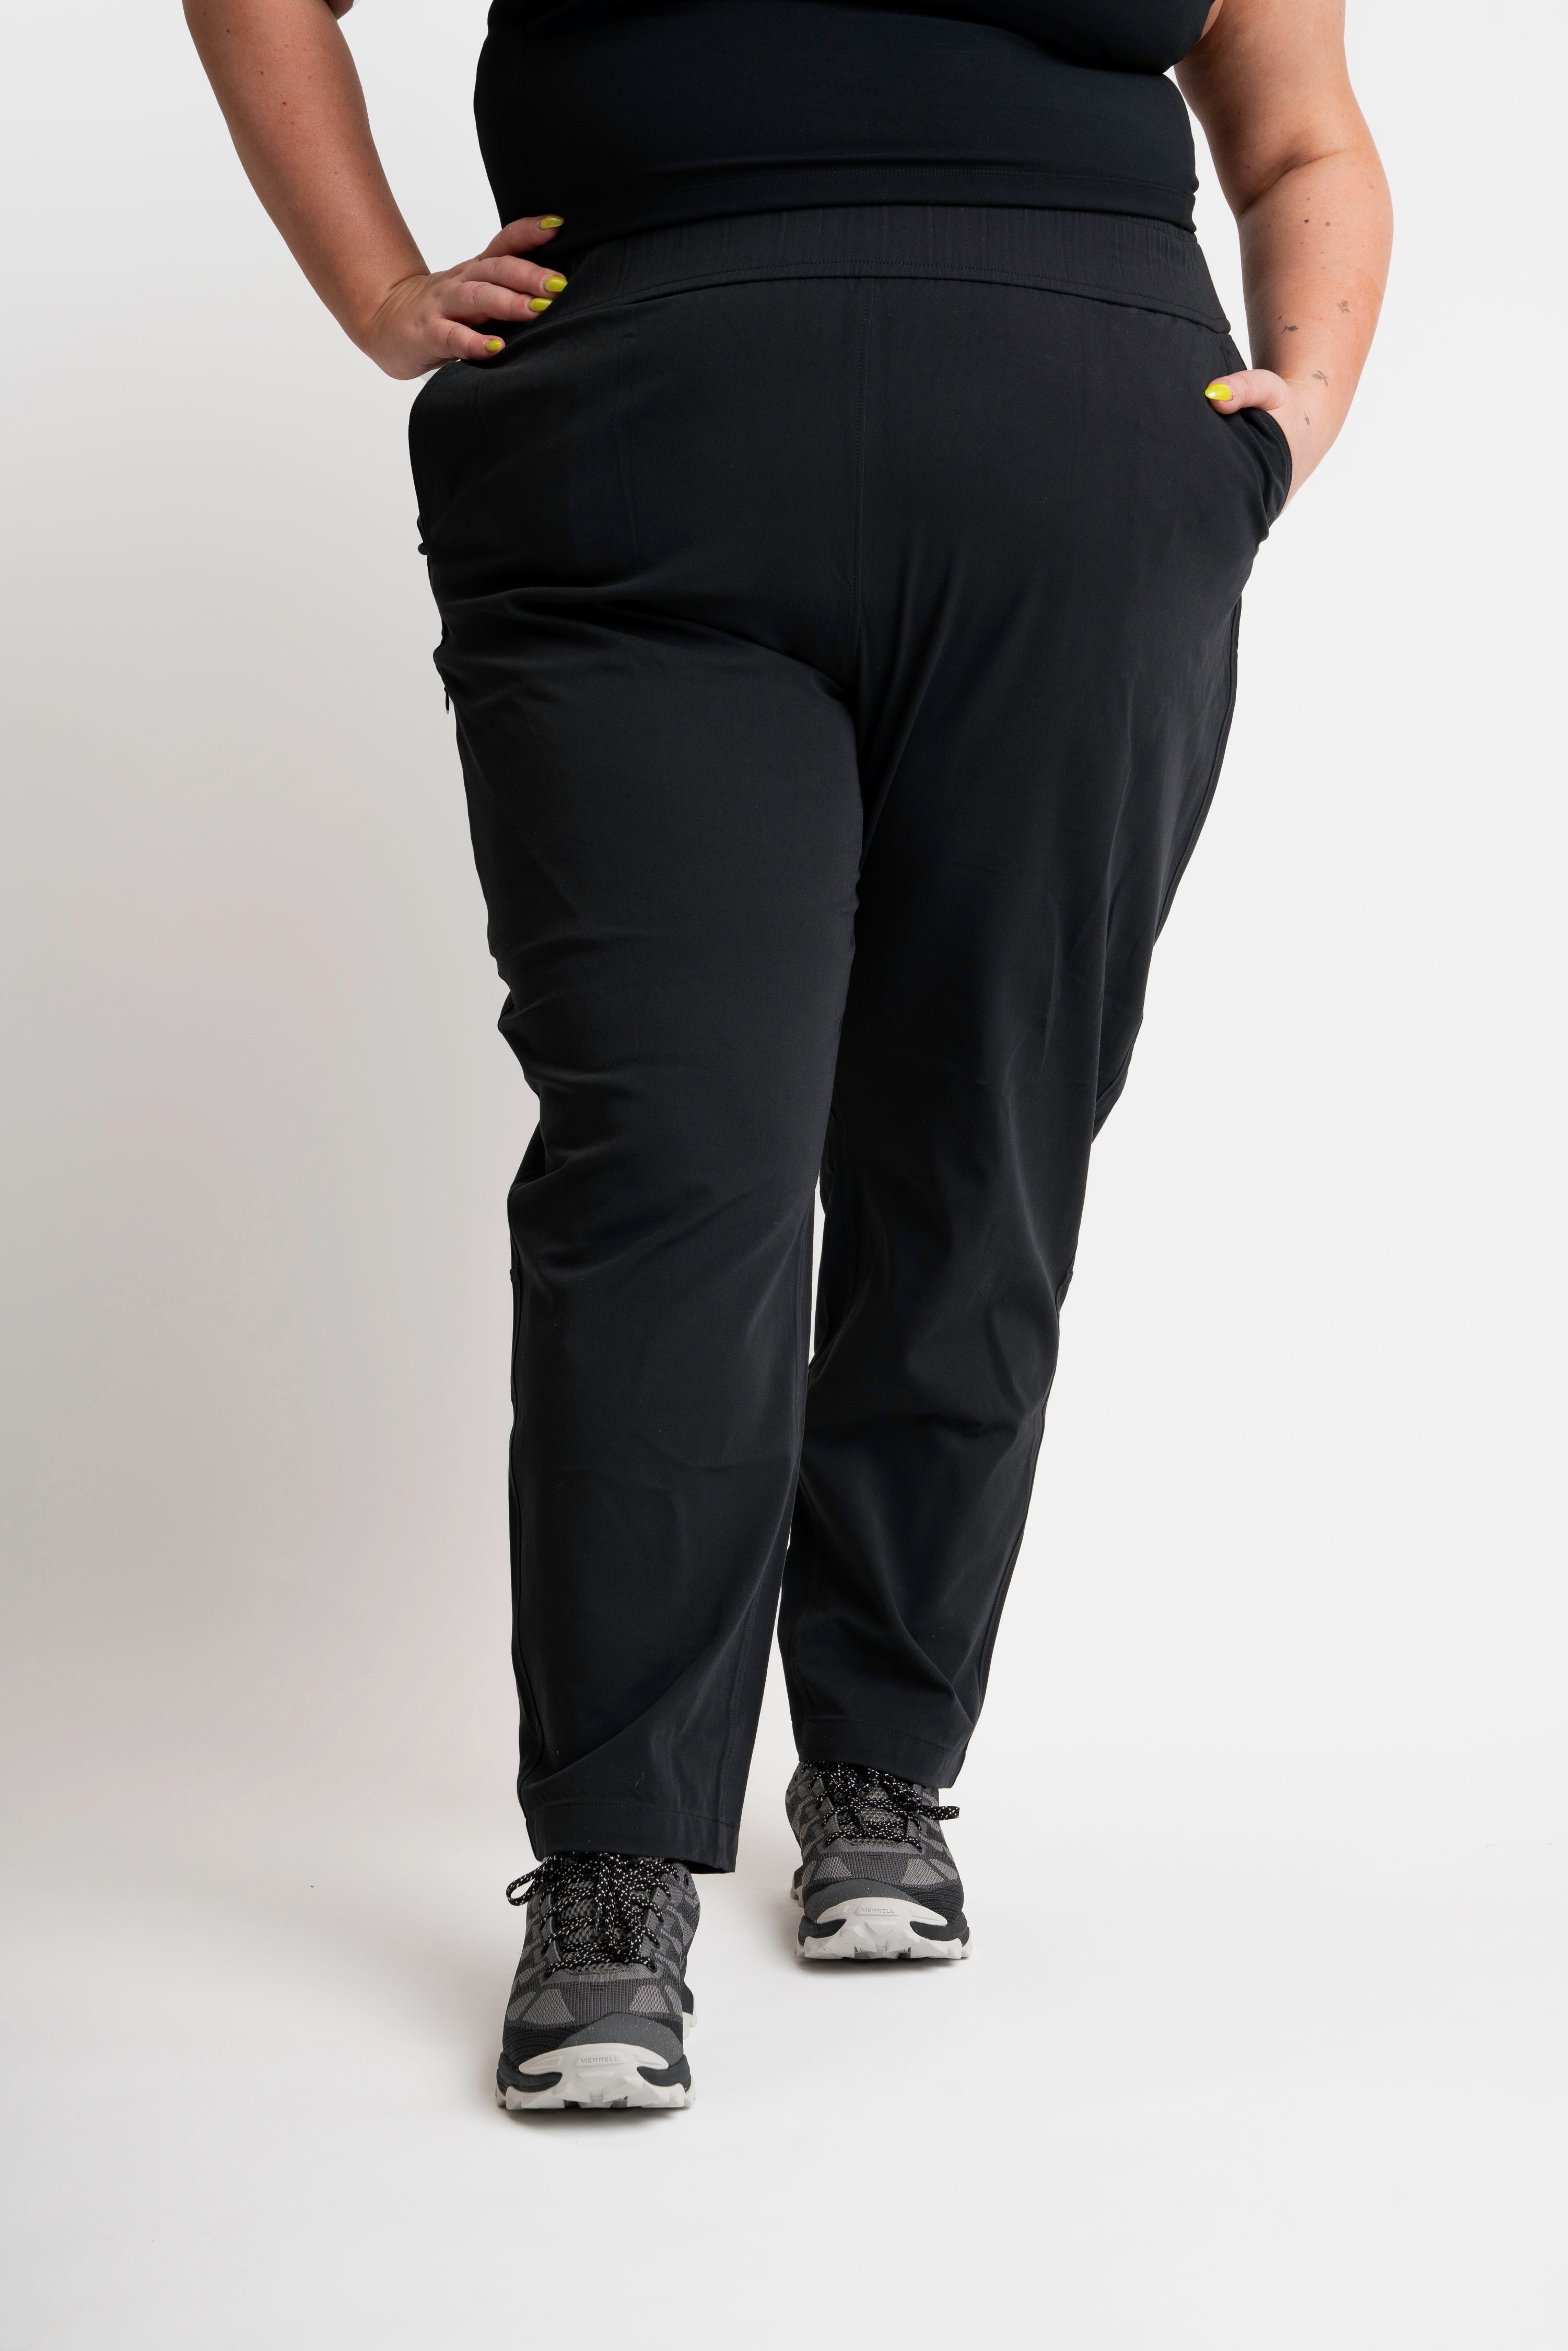 Buy CURVY FIT Grey Bell Bottom Pants for Women – Formal Pants – Office Pants  Girls Pants at Amazon.in